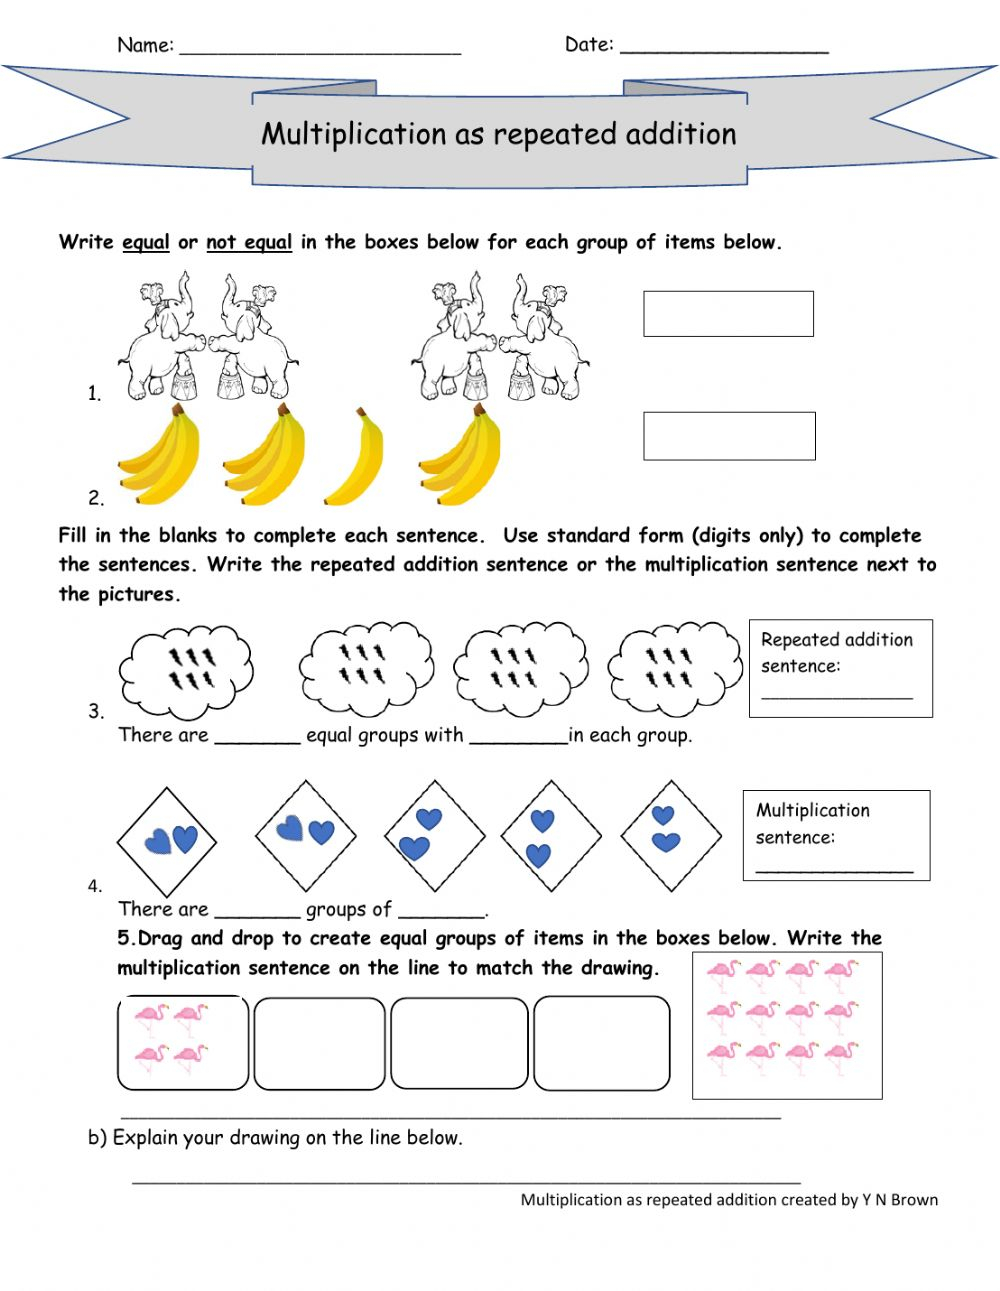 significant-digits-practice-worksheet